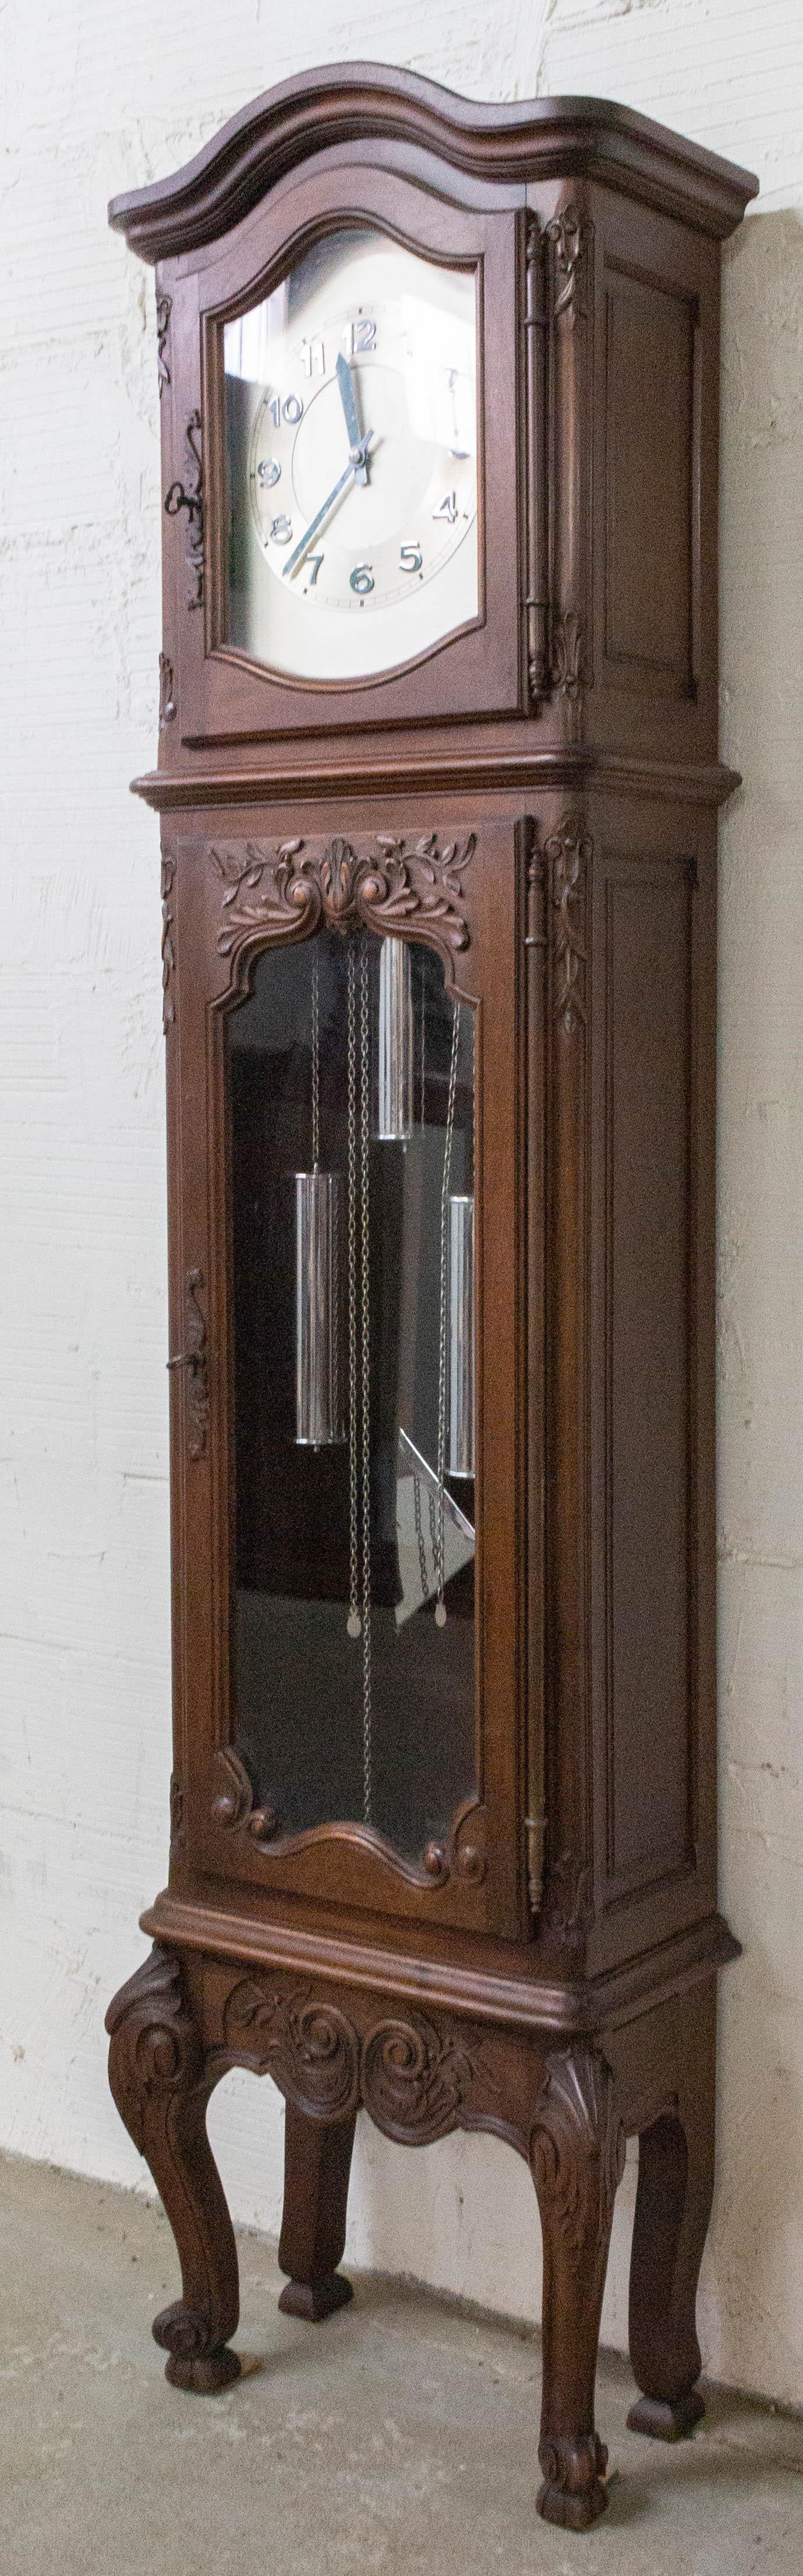 french style grandfather clock